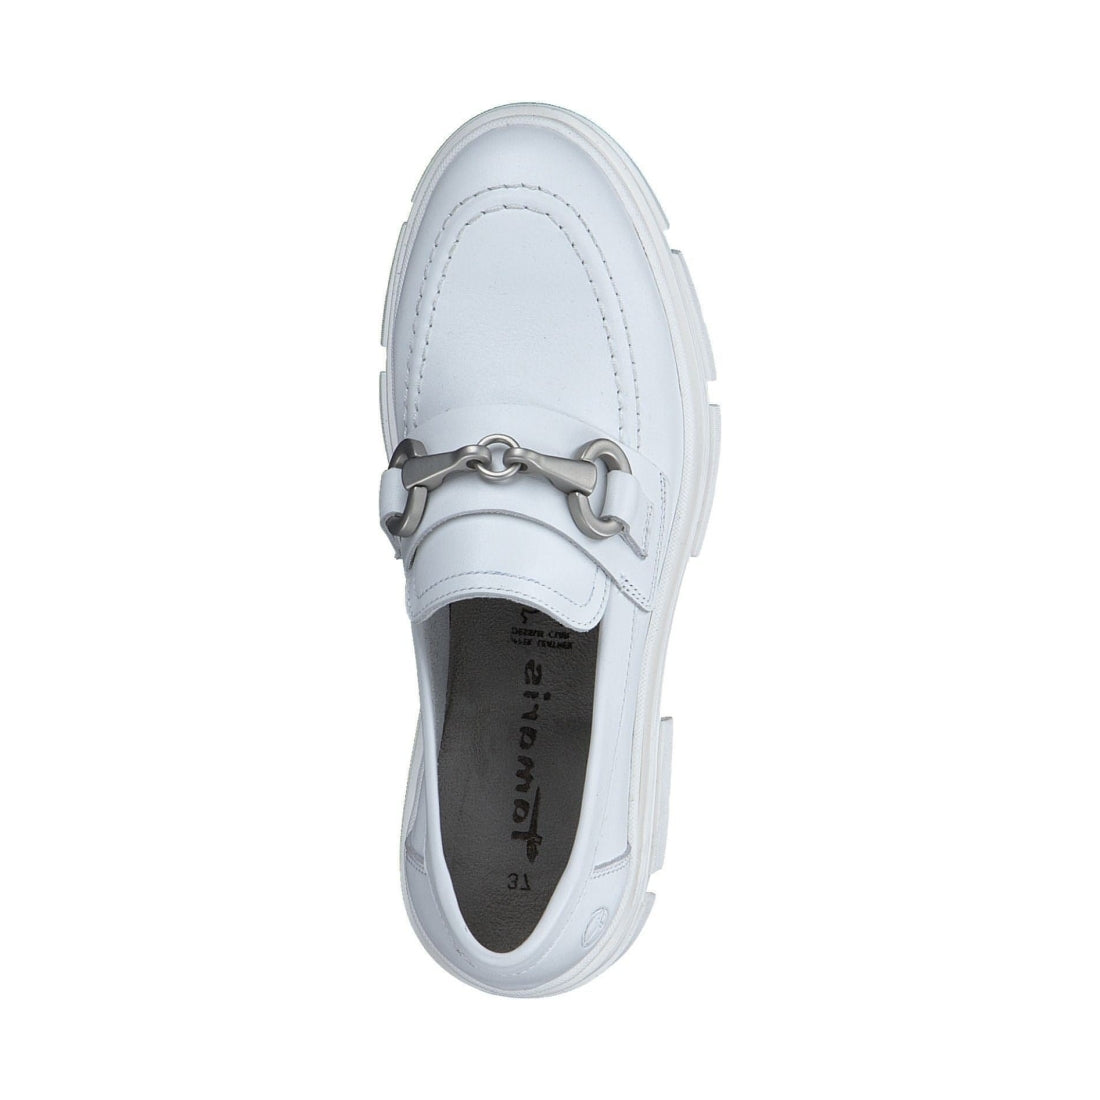 Tamaris womens white leather casual closed loafers | Vilbury London